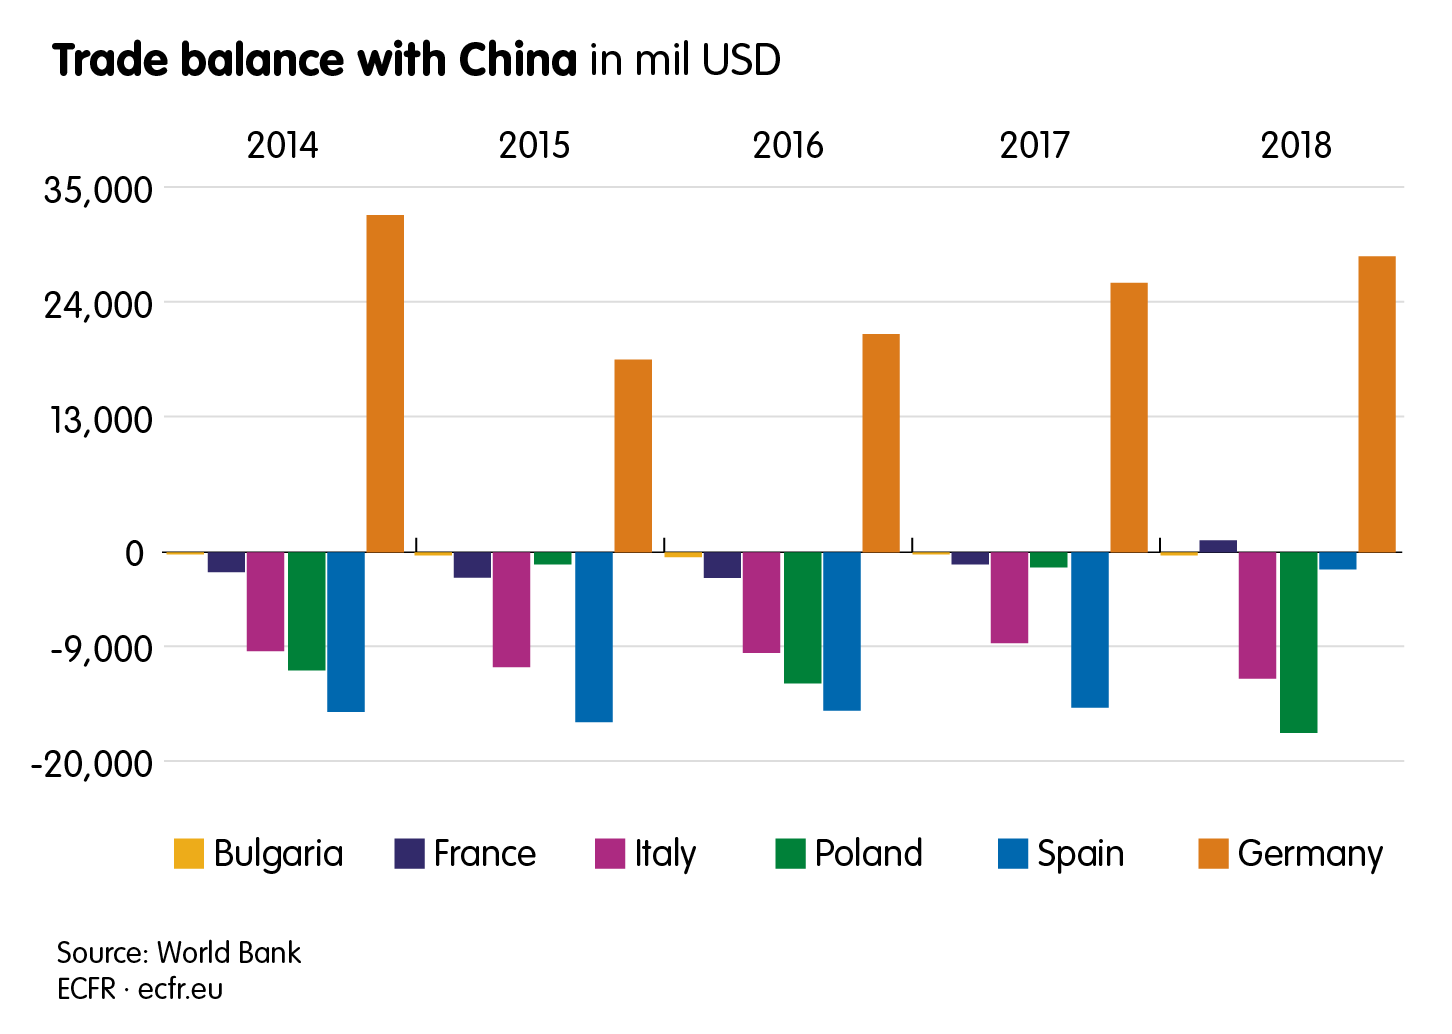 Trade balance with China in USD millions